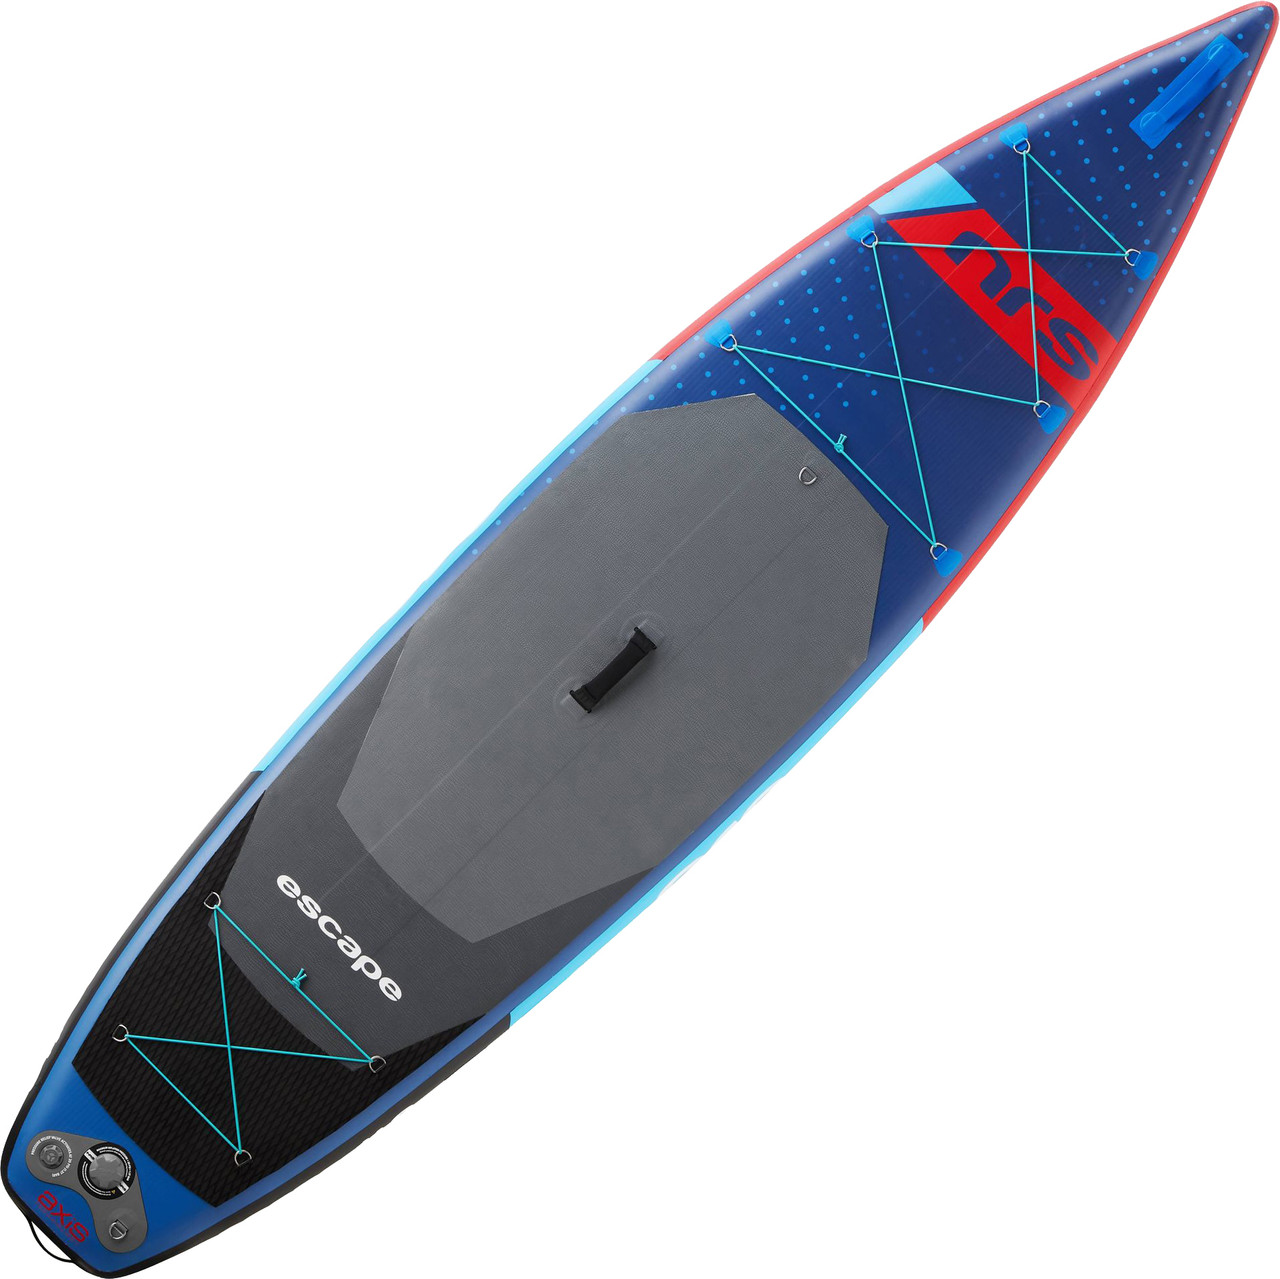 NRS Thrive 10.3 Inflatable SUP Board